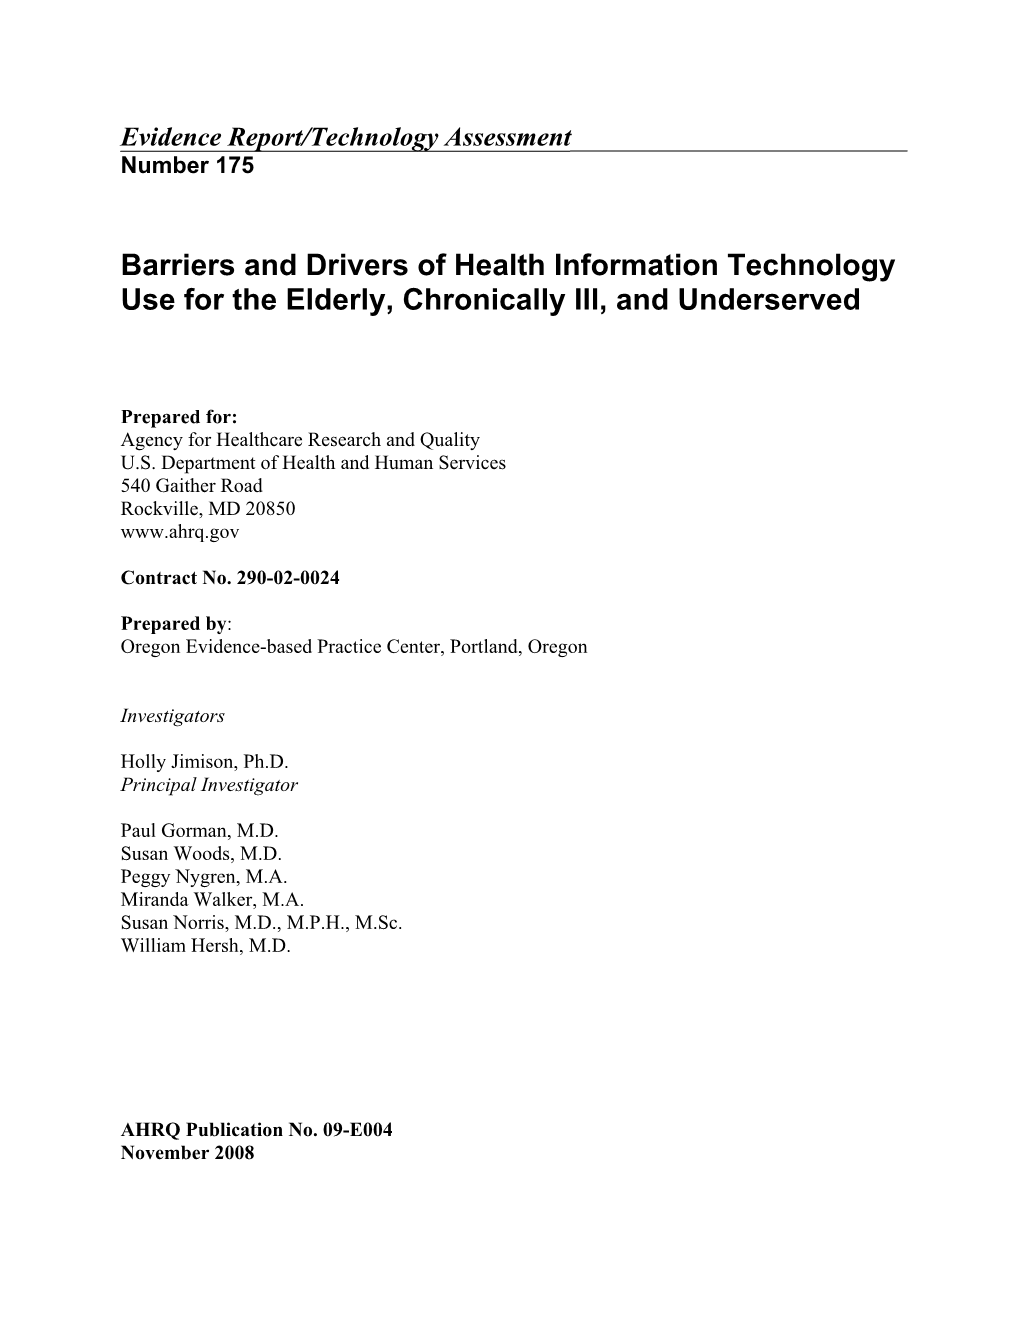 Barriers and Drivers of Health Information Technology Use for the Elderly, Chronically Ill, and Underserved